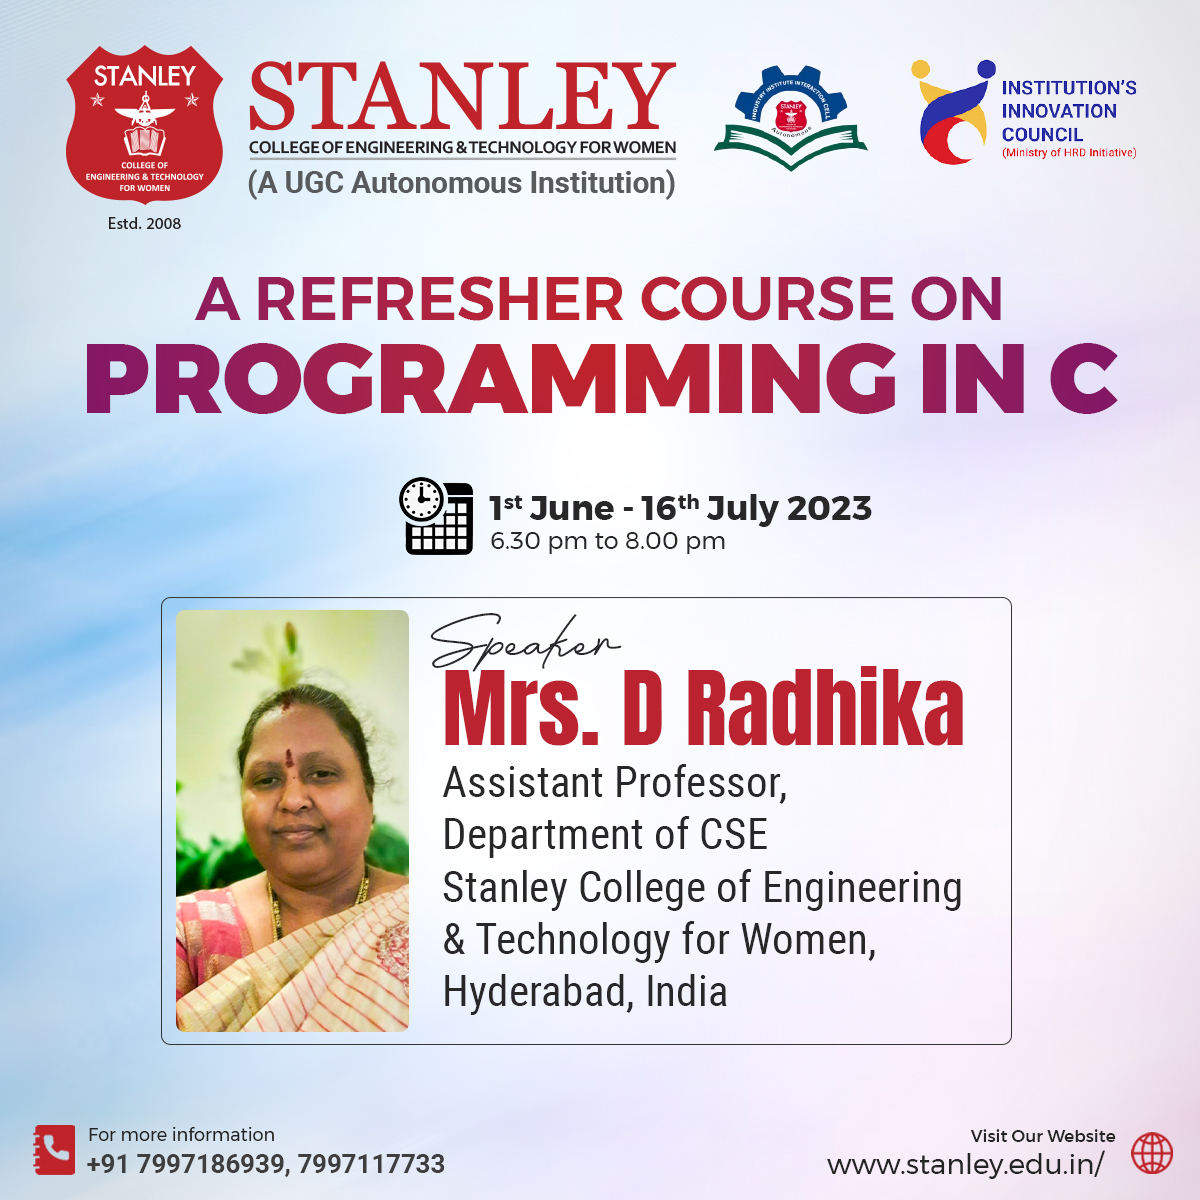 Join us for a refresher course on programming in C from 1st June to 16th July. Taught by Mrs. D Radhika, an Assistant Professor in Department of #ComputerScienceEngineering. Timings 6:30 pm to 8:00 pm. 
#Stanley #StanleyCollege #SCETW #GuestLecturer #RefresherCourse #CProgramming